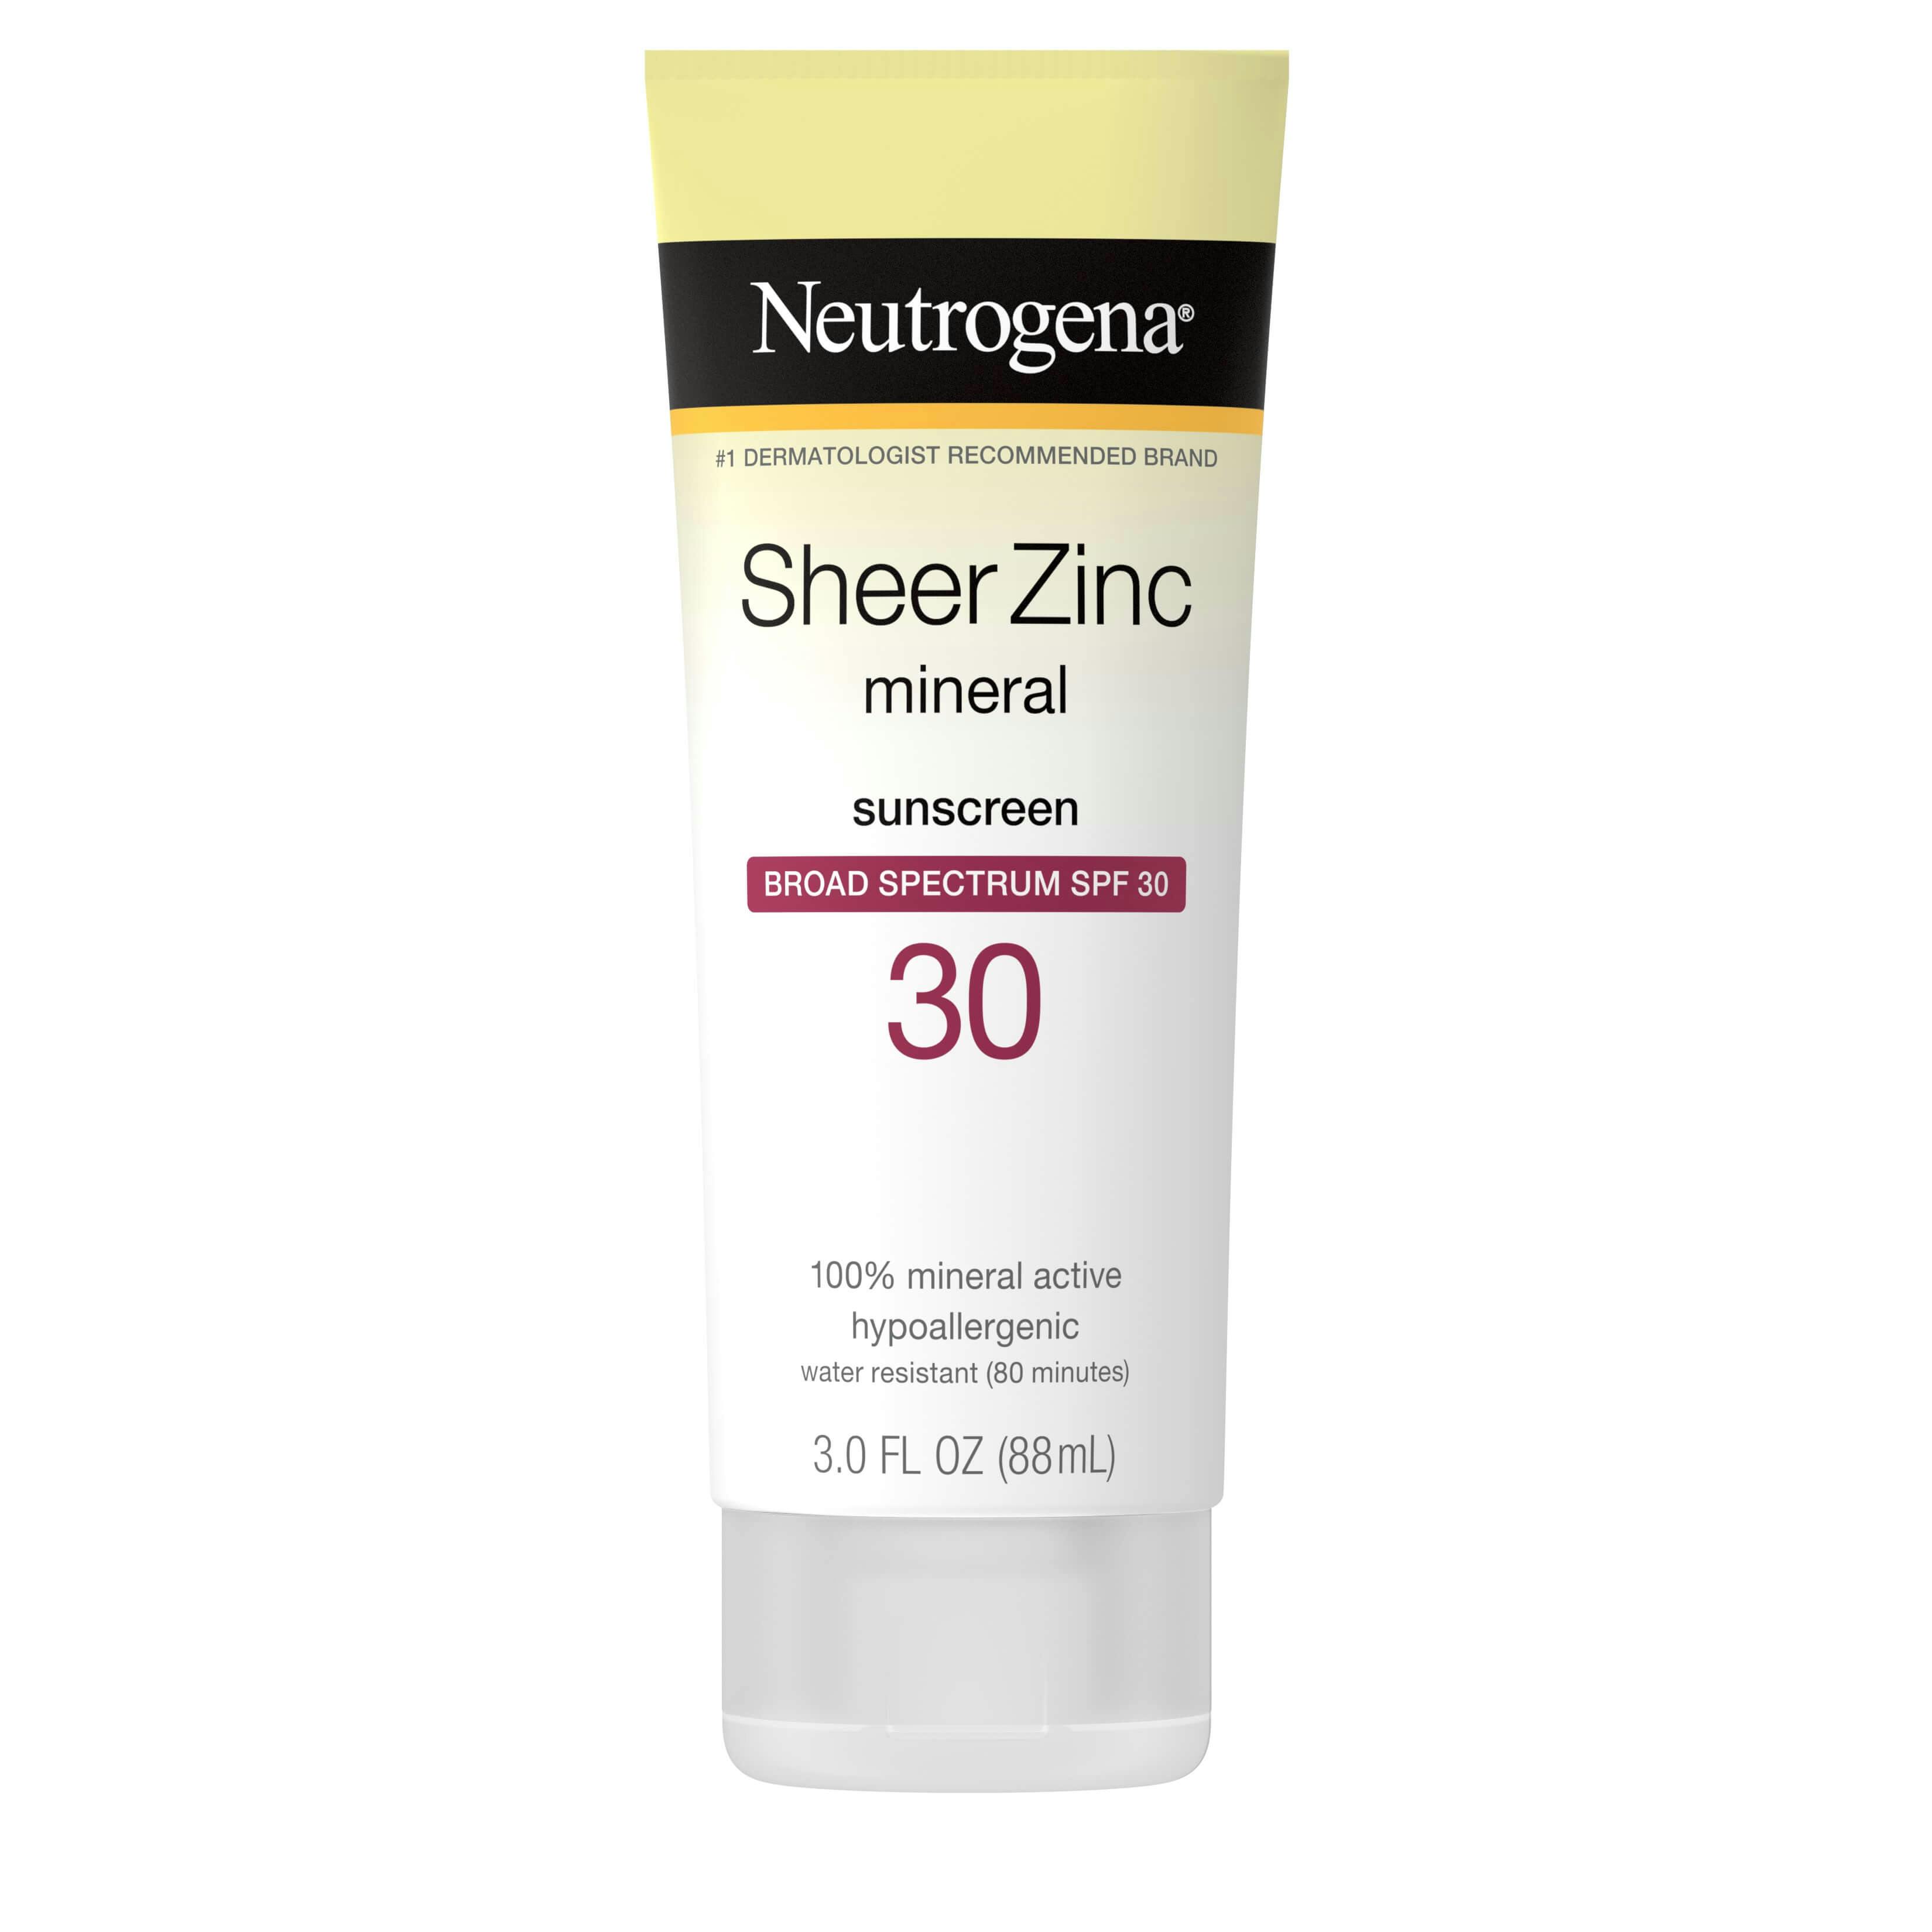 neutrogena sunscreen recall other questions answered